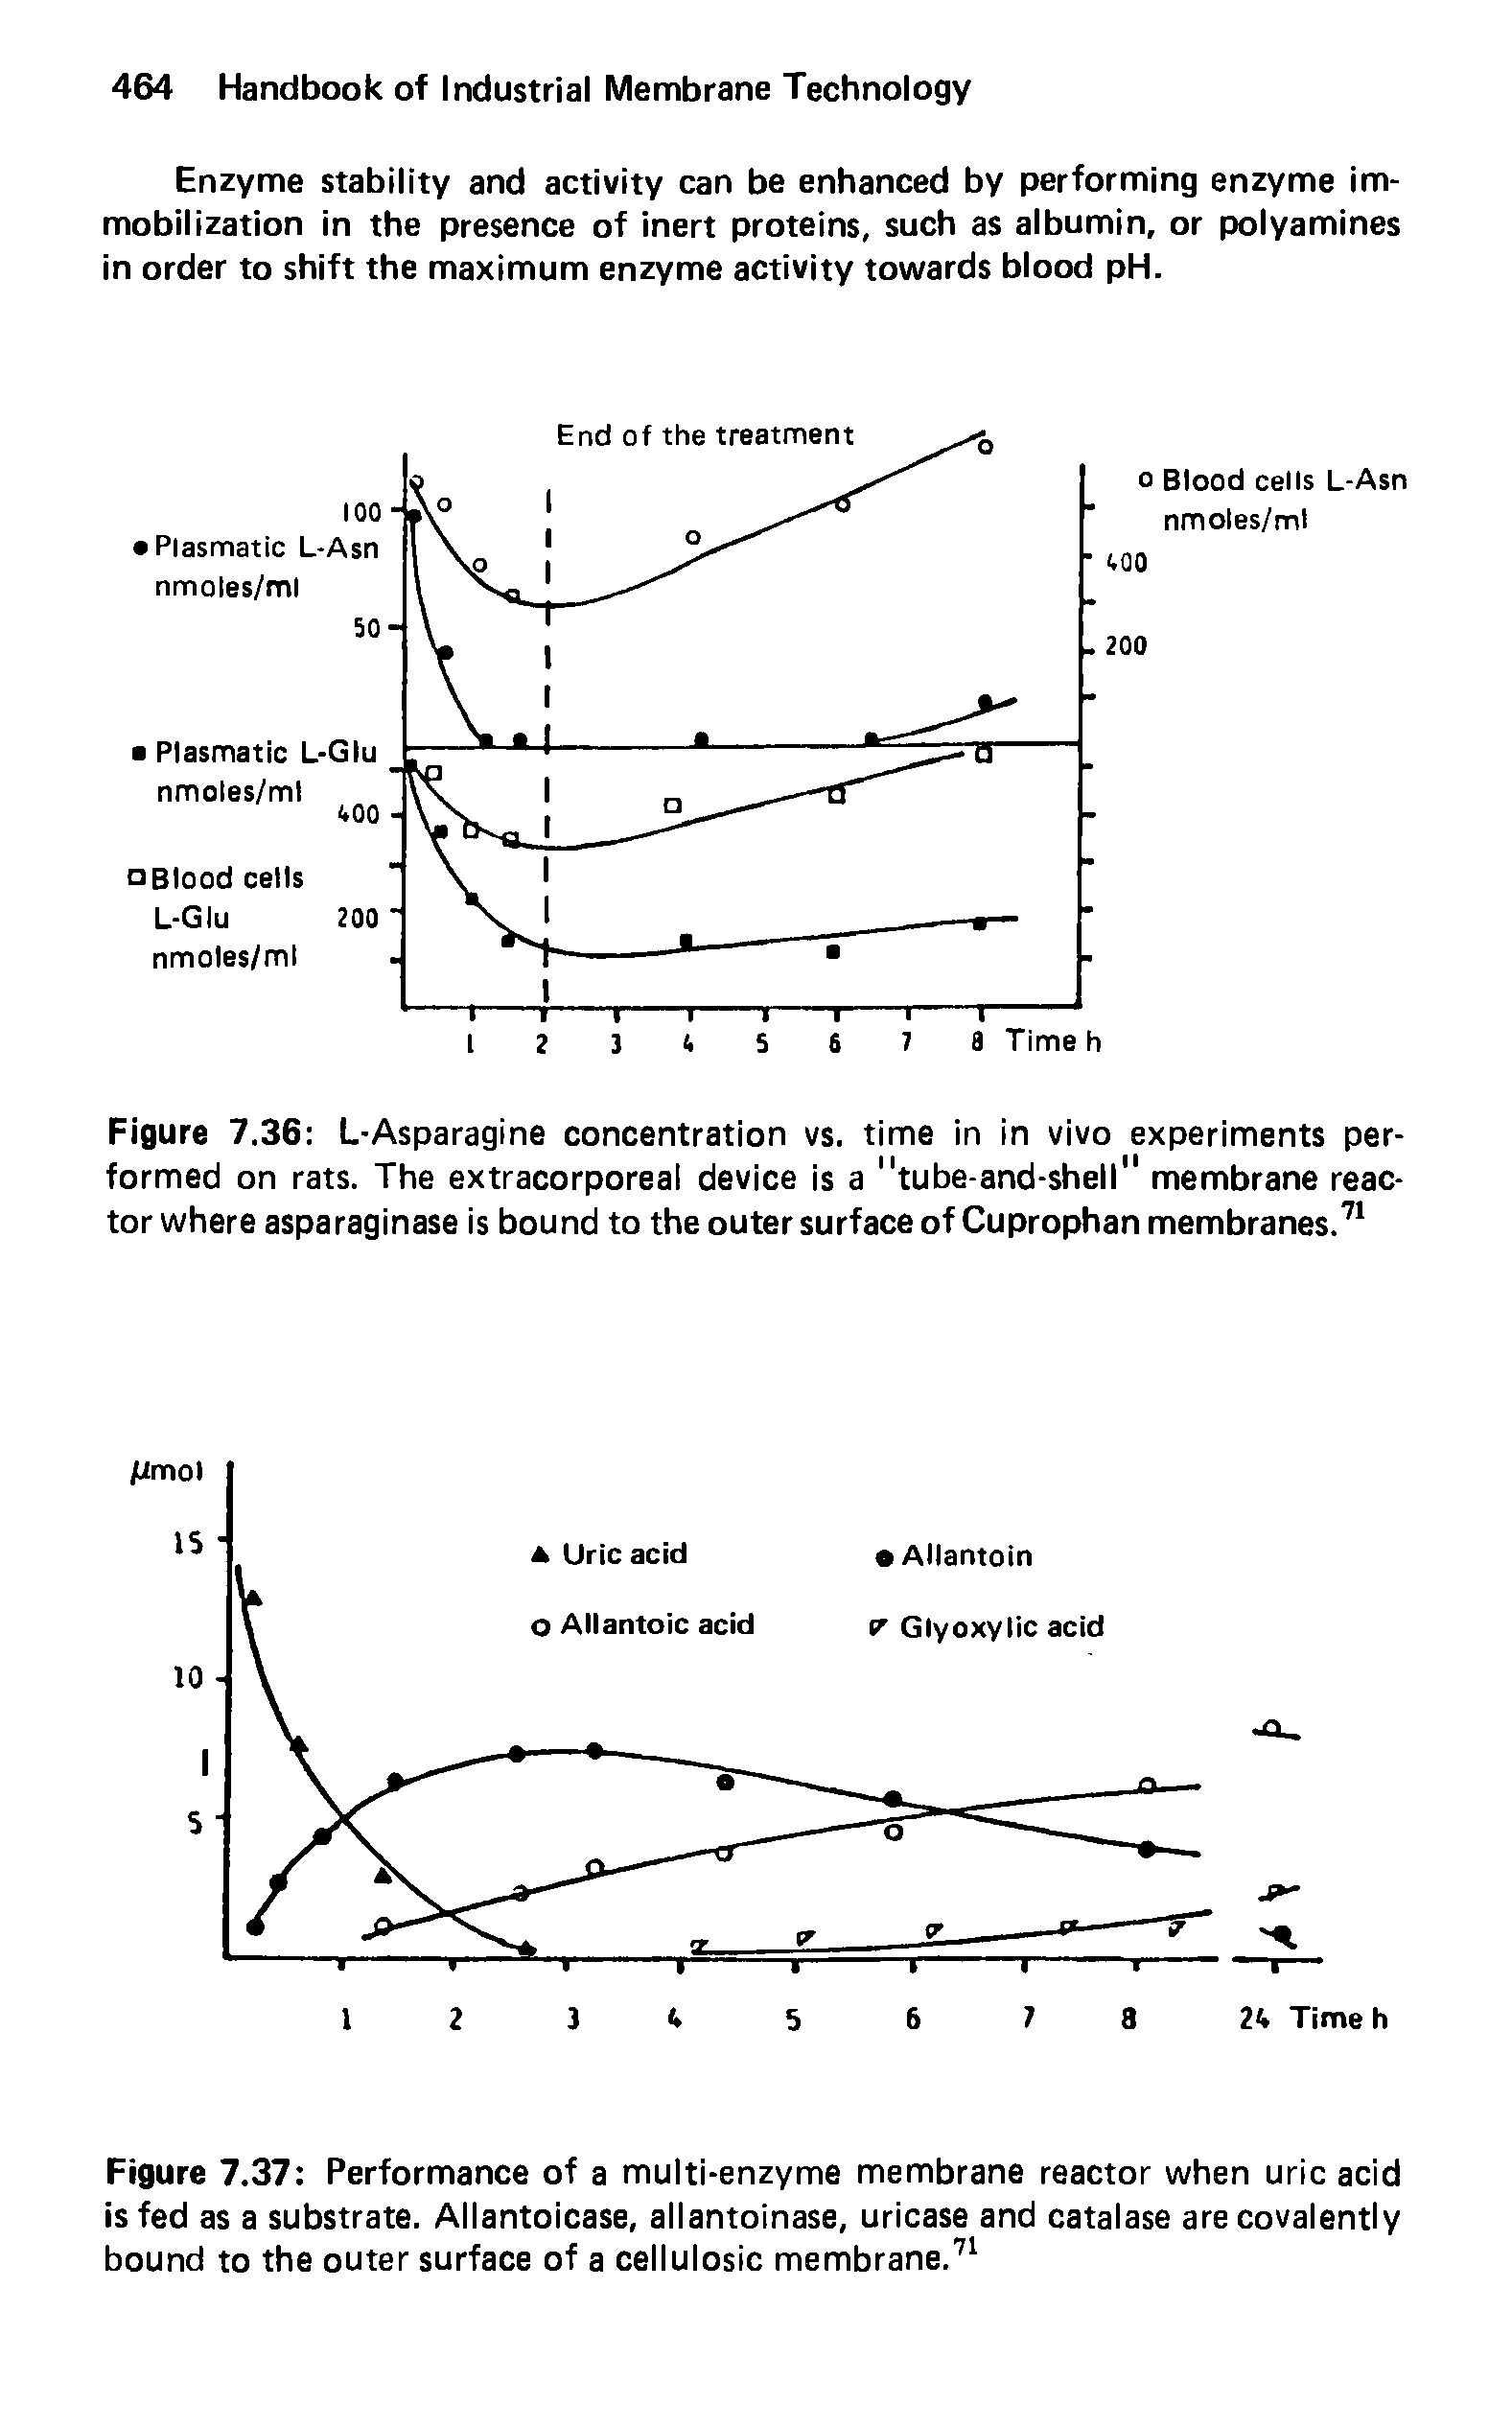 Figure 7.36 L-Asparagine concentration vs. time in in vivo experiments performed on rats. The extracorporeal device is a "tube-and-shell" membrane reactor where asparaginase is bound to the outer surface of Cuprophan membranes.71...